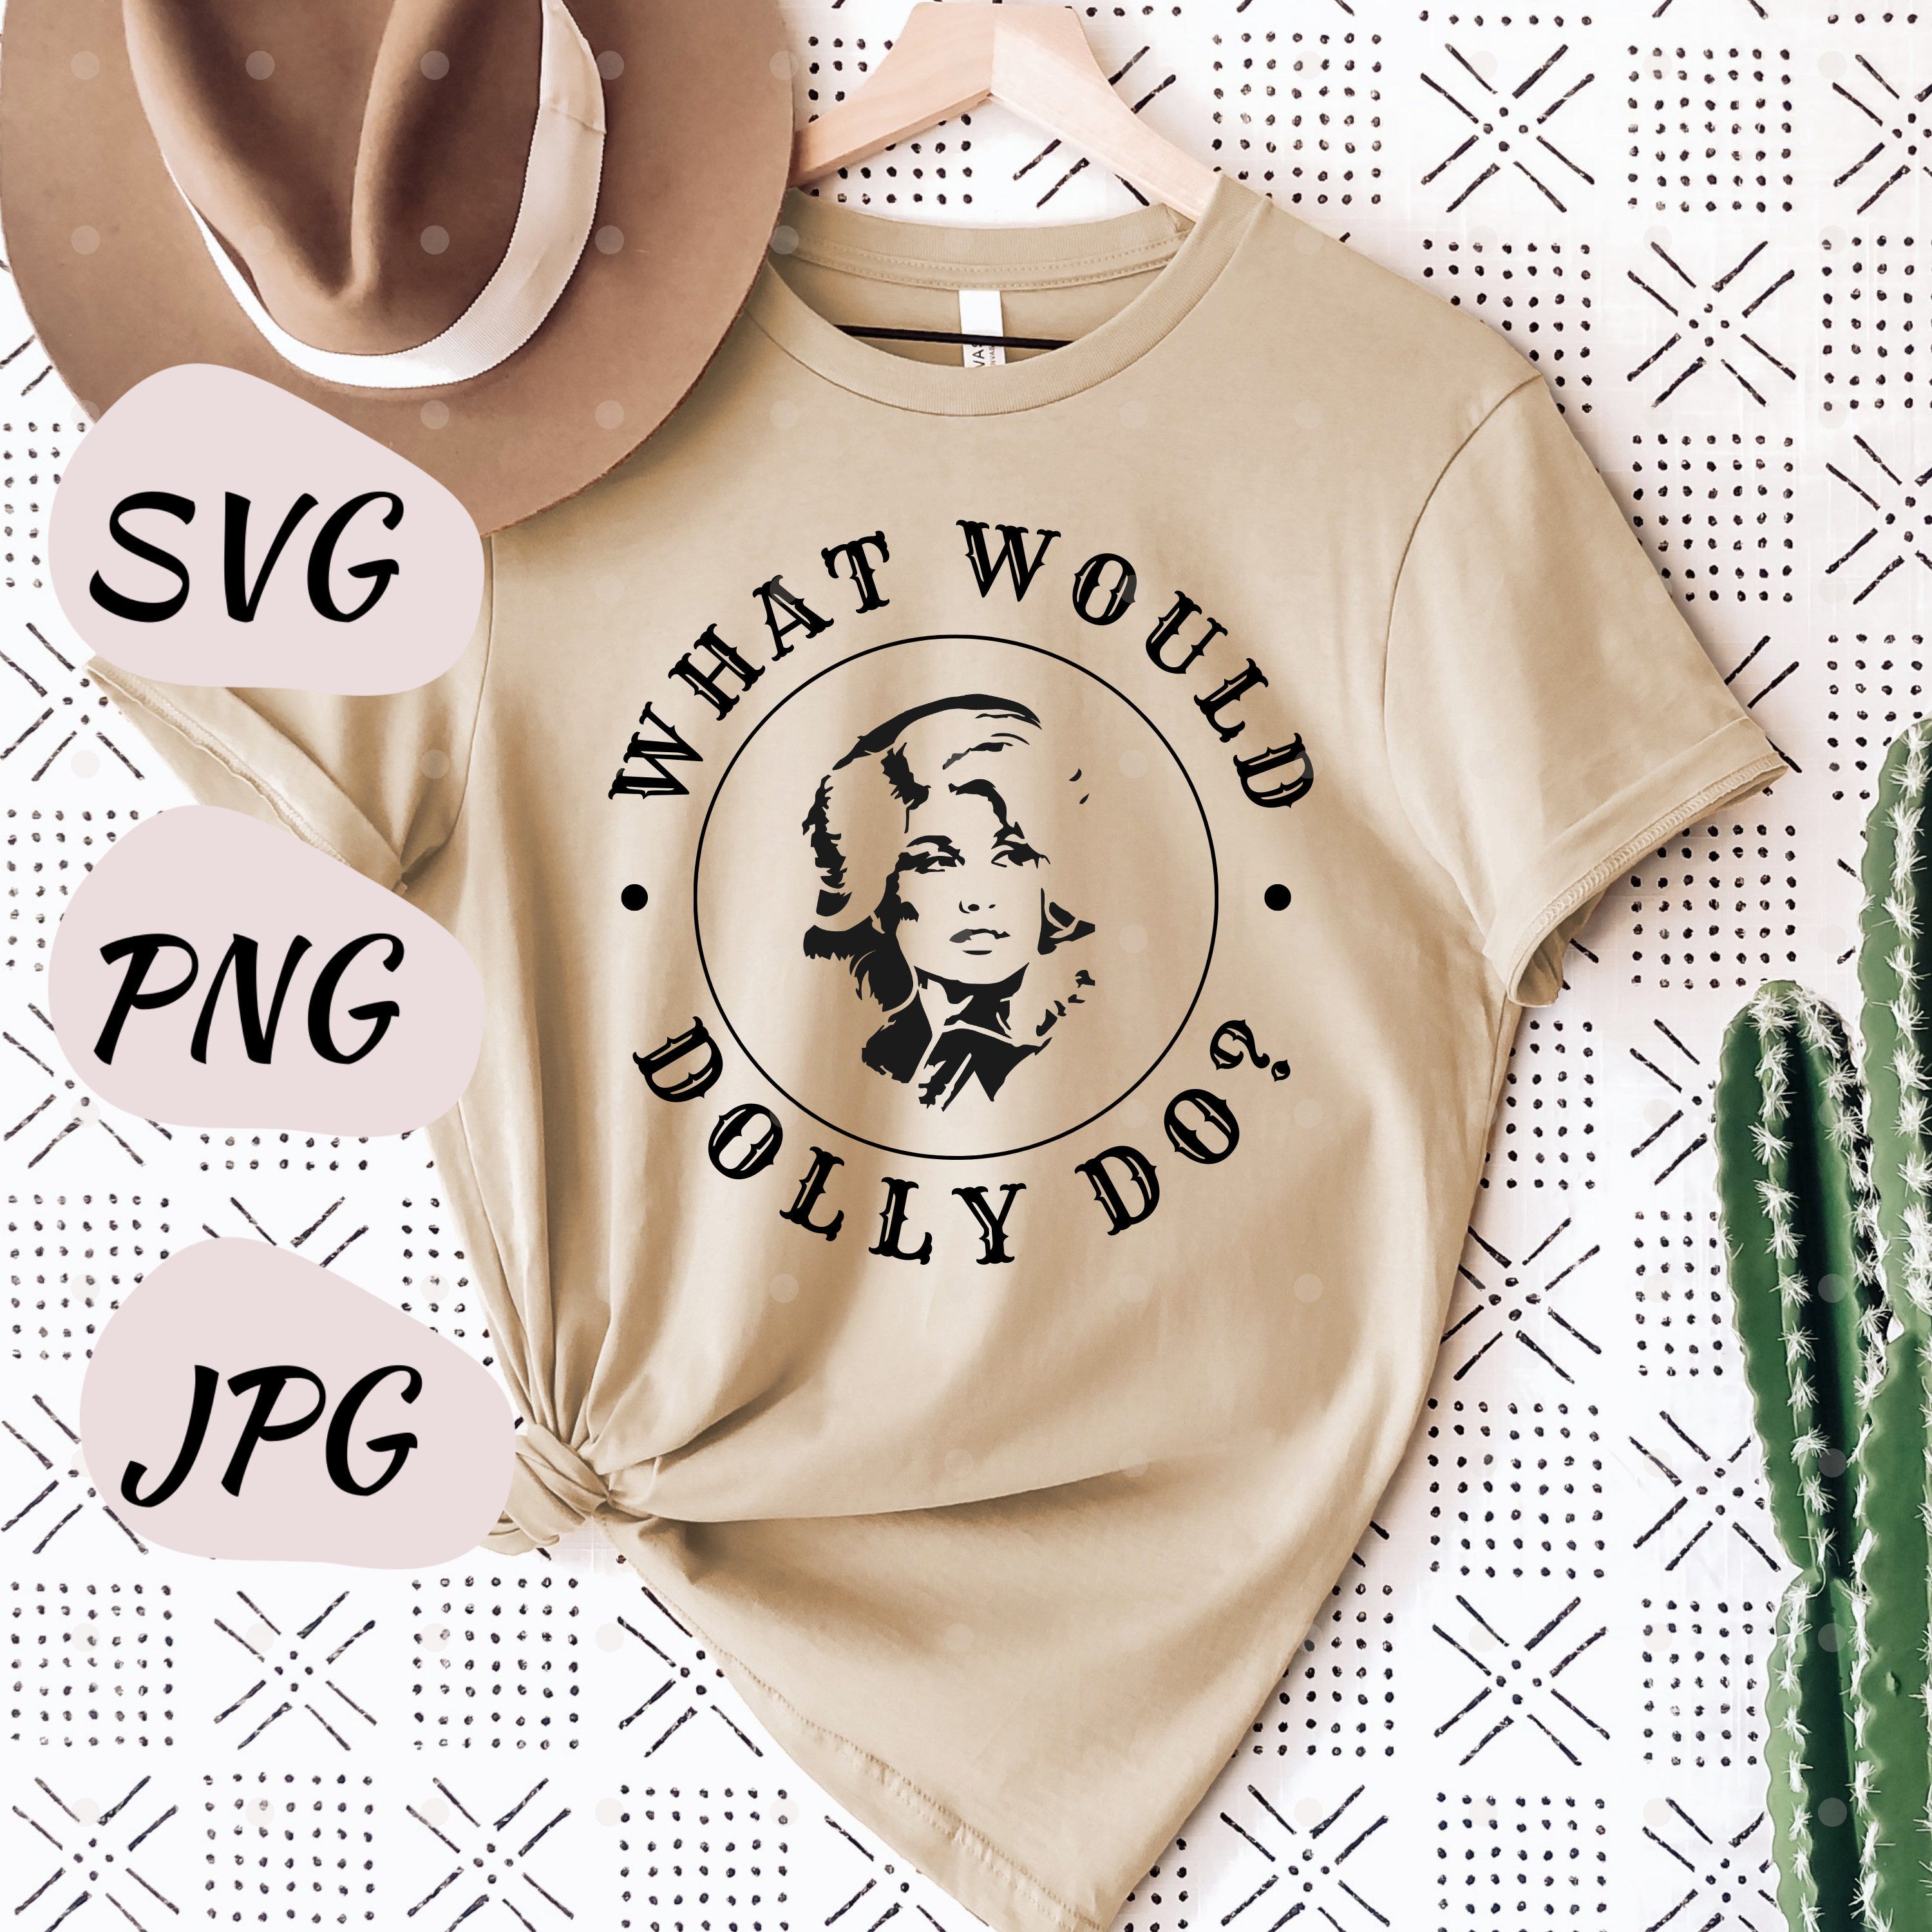 What Would Dolly Do? // SVG - PNG - JPG